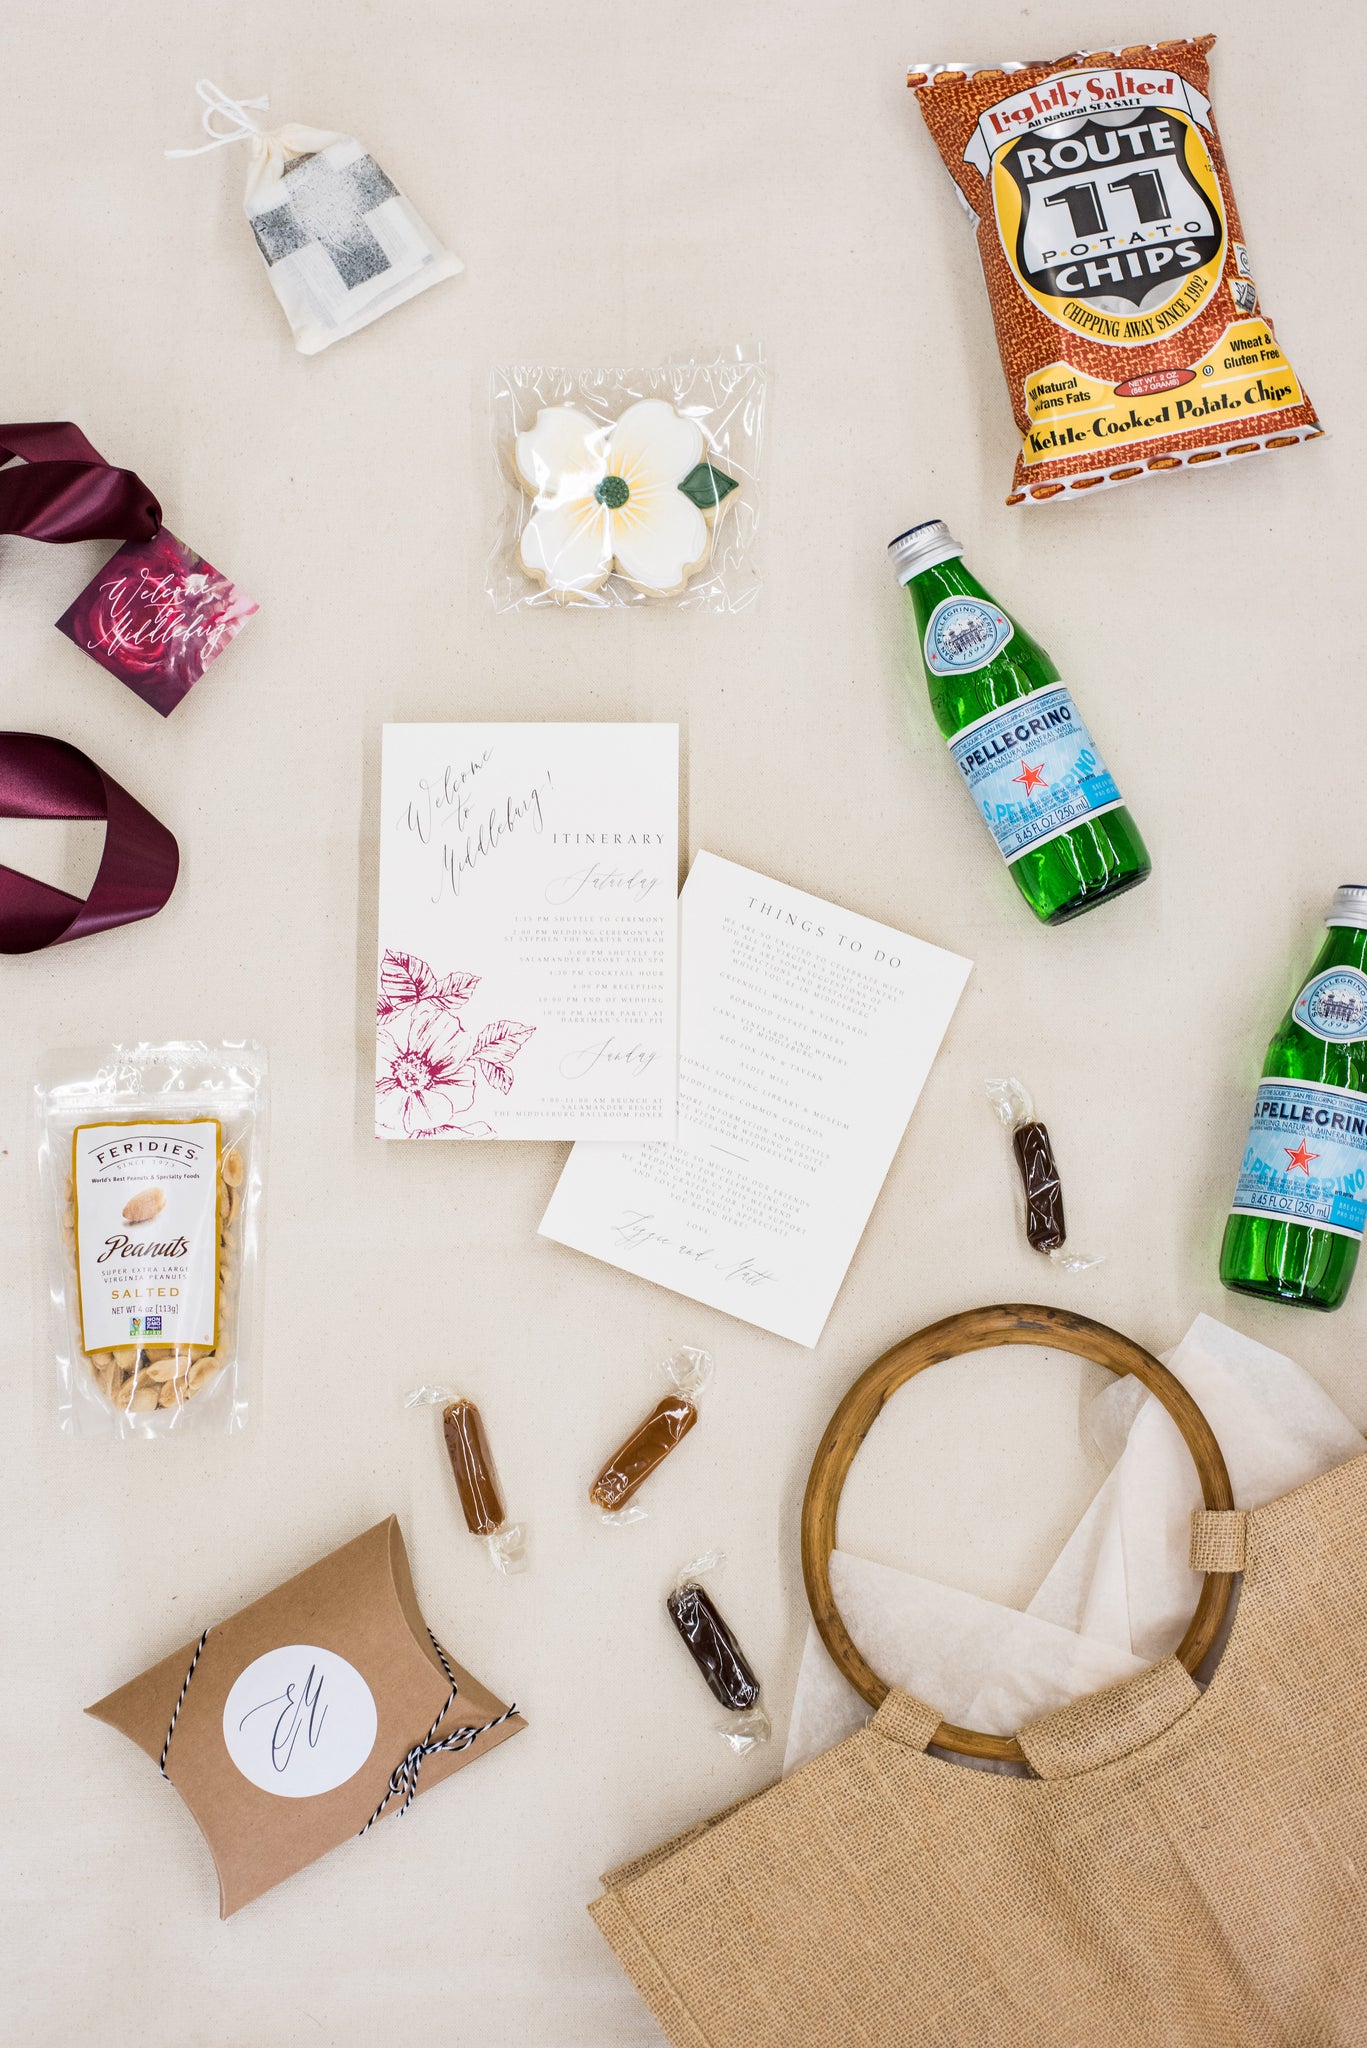 Why give wedding welcome gifts